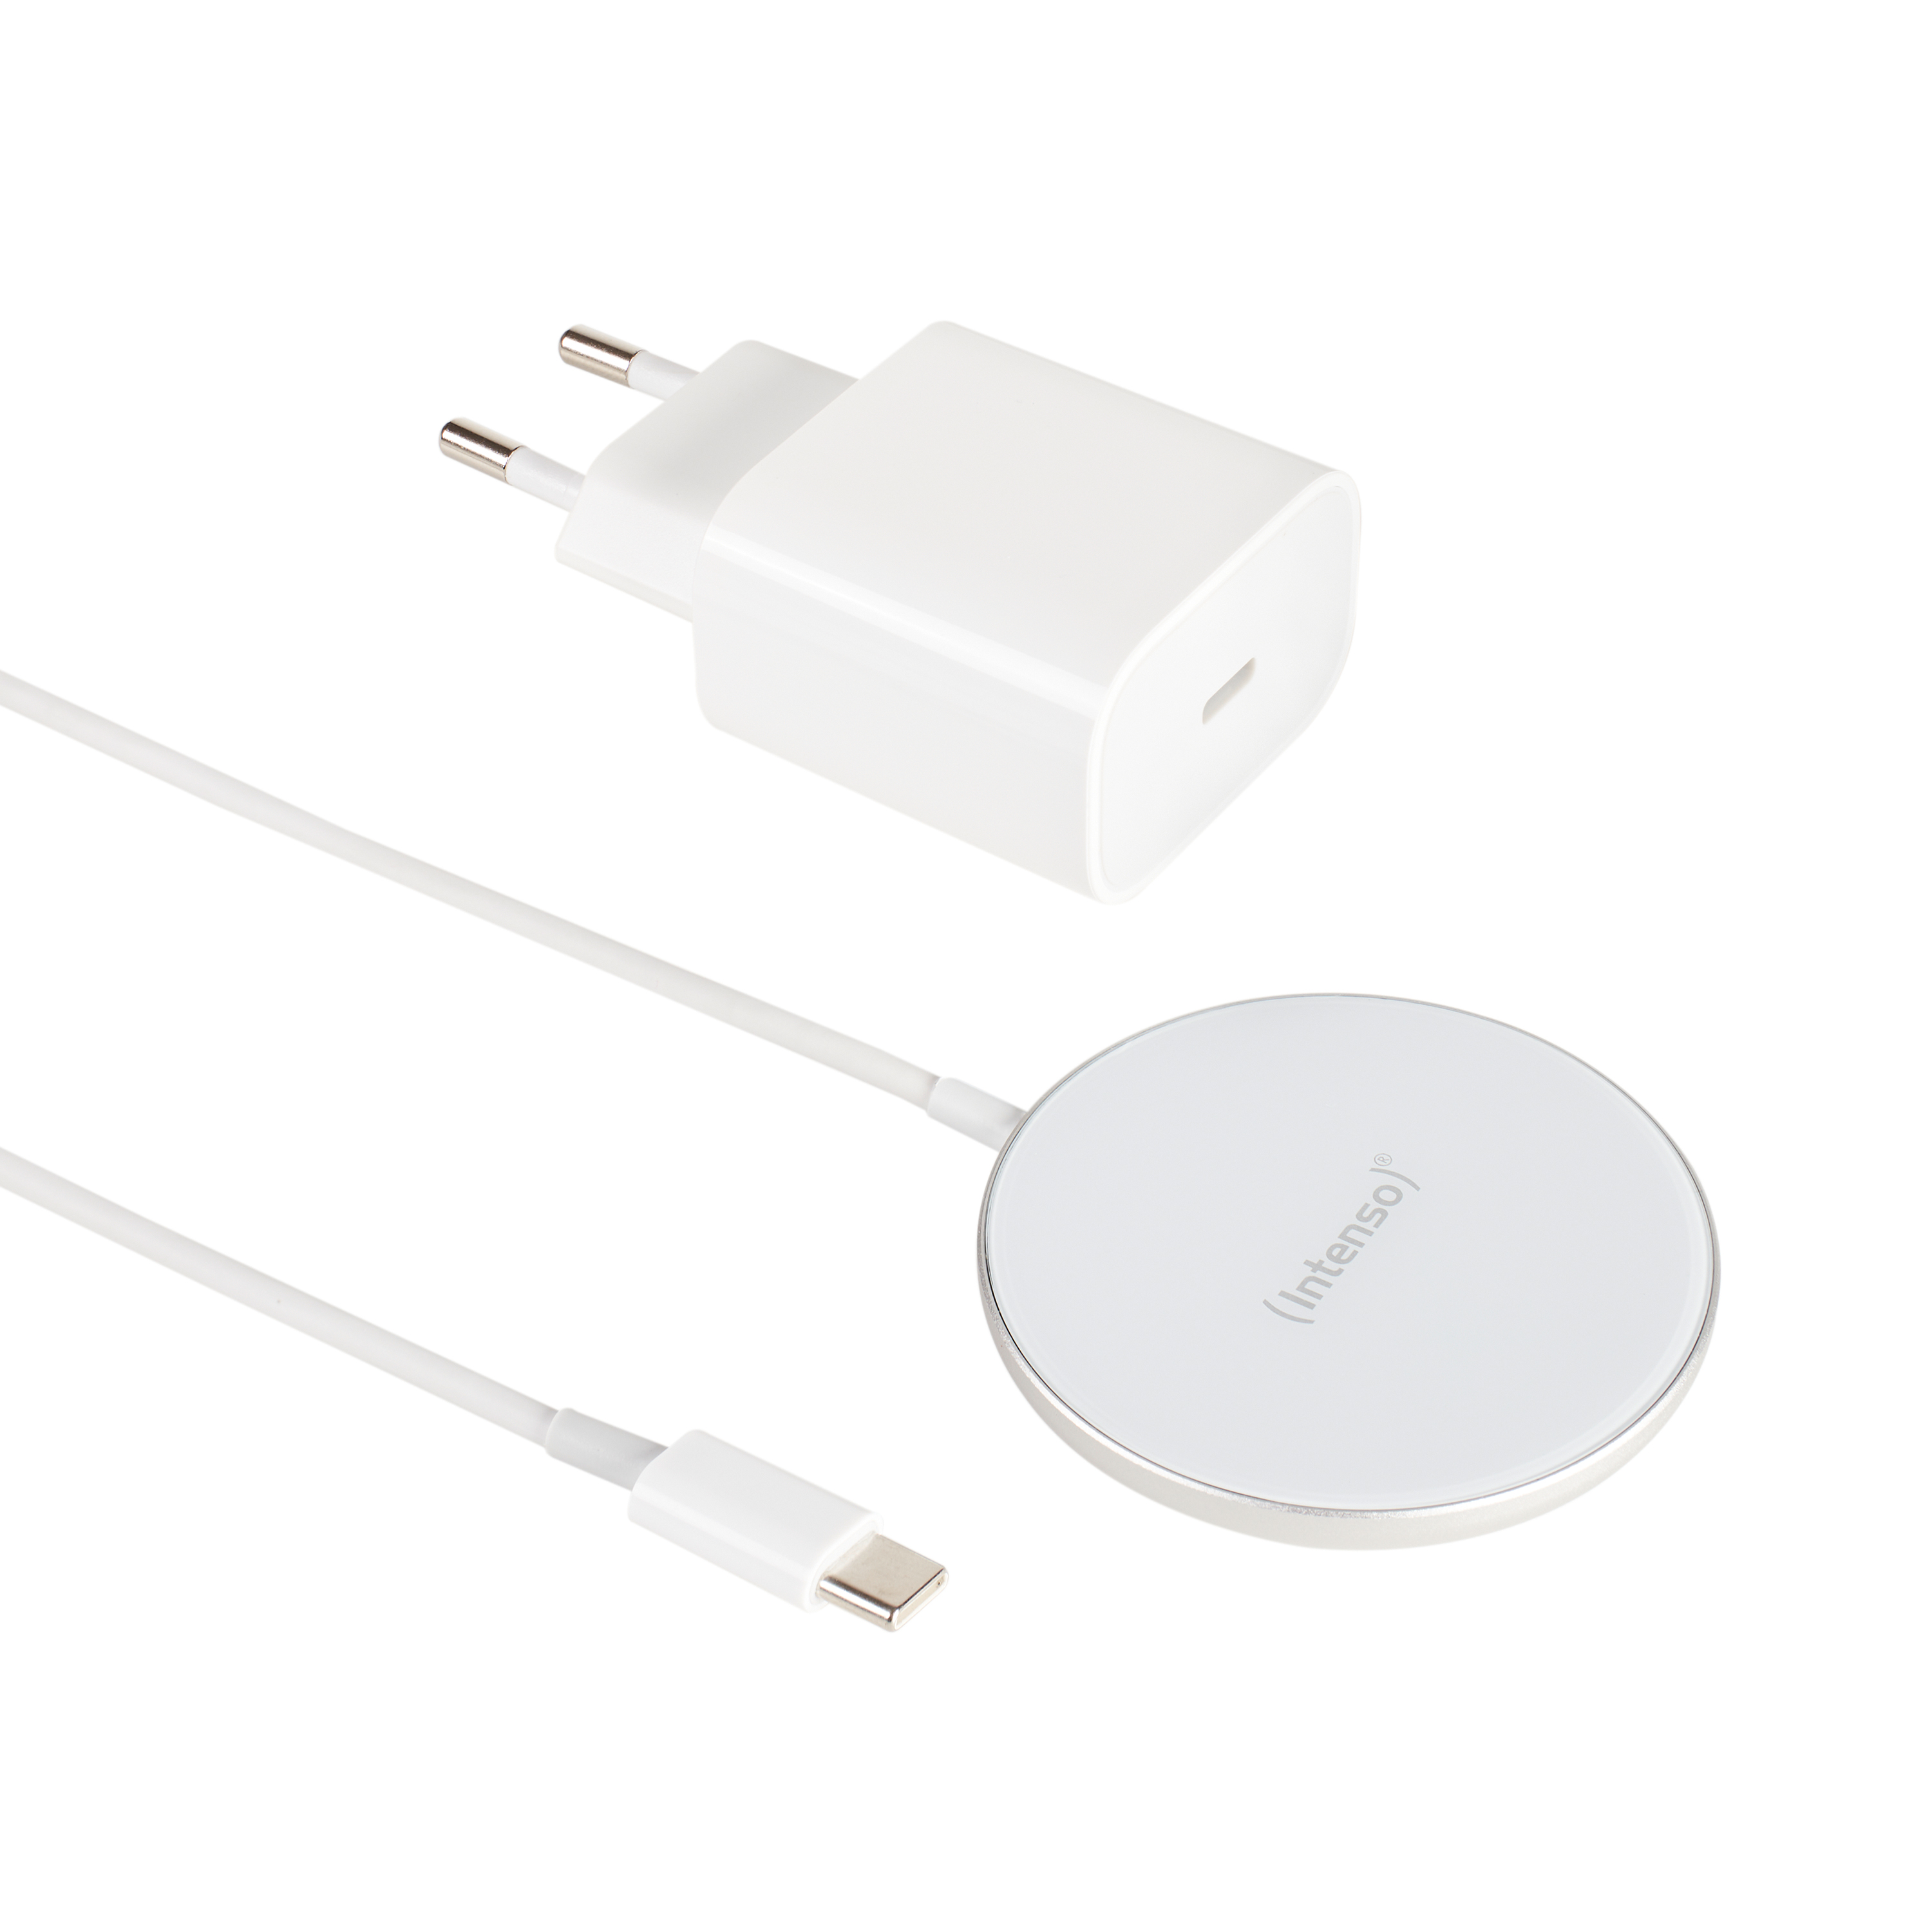 Apple, INTENSO Wireless Induktionsladepad Weiß Magnetic Charger Magnetisches MW1